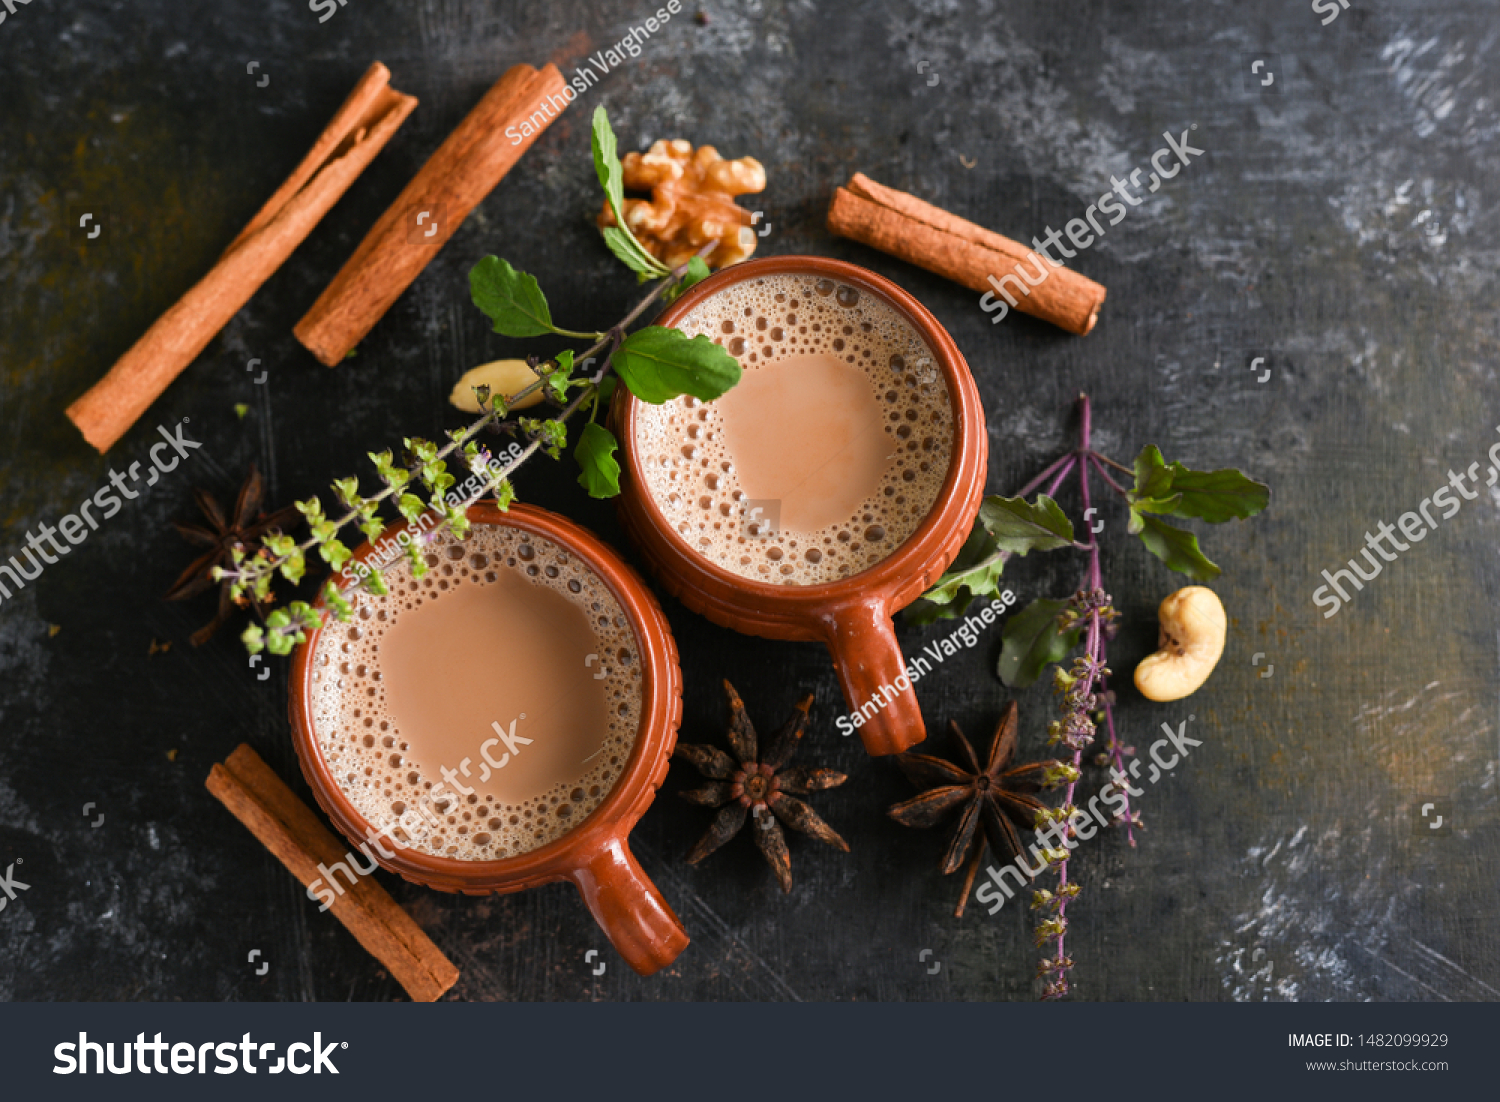 Top view of Indian Masala Chai or traditional beverage with tea, milk and spices Kerala India. Two cups of organic ayurvedic or herbal drink India, good in winter for immunity boosting. #1482099929